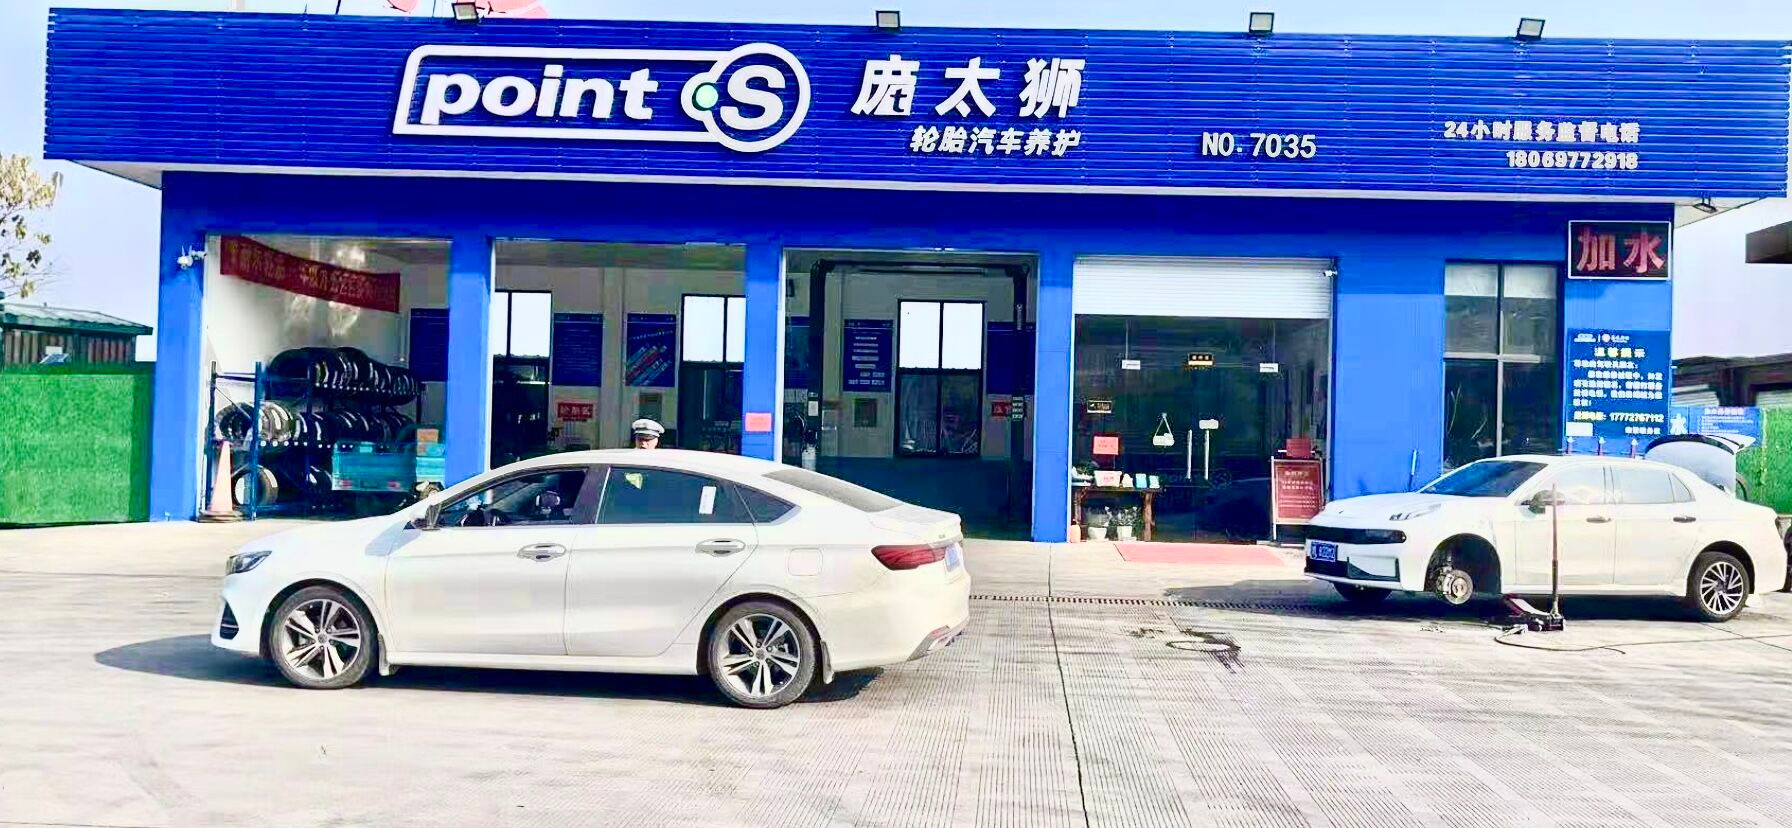 Point S continues strategic tyre retail growth in China and Singapore